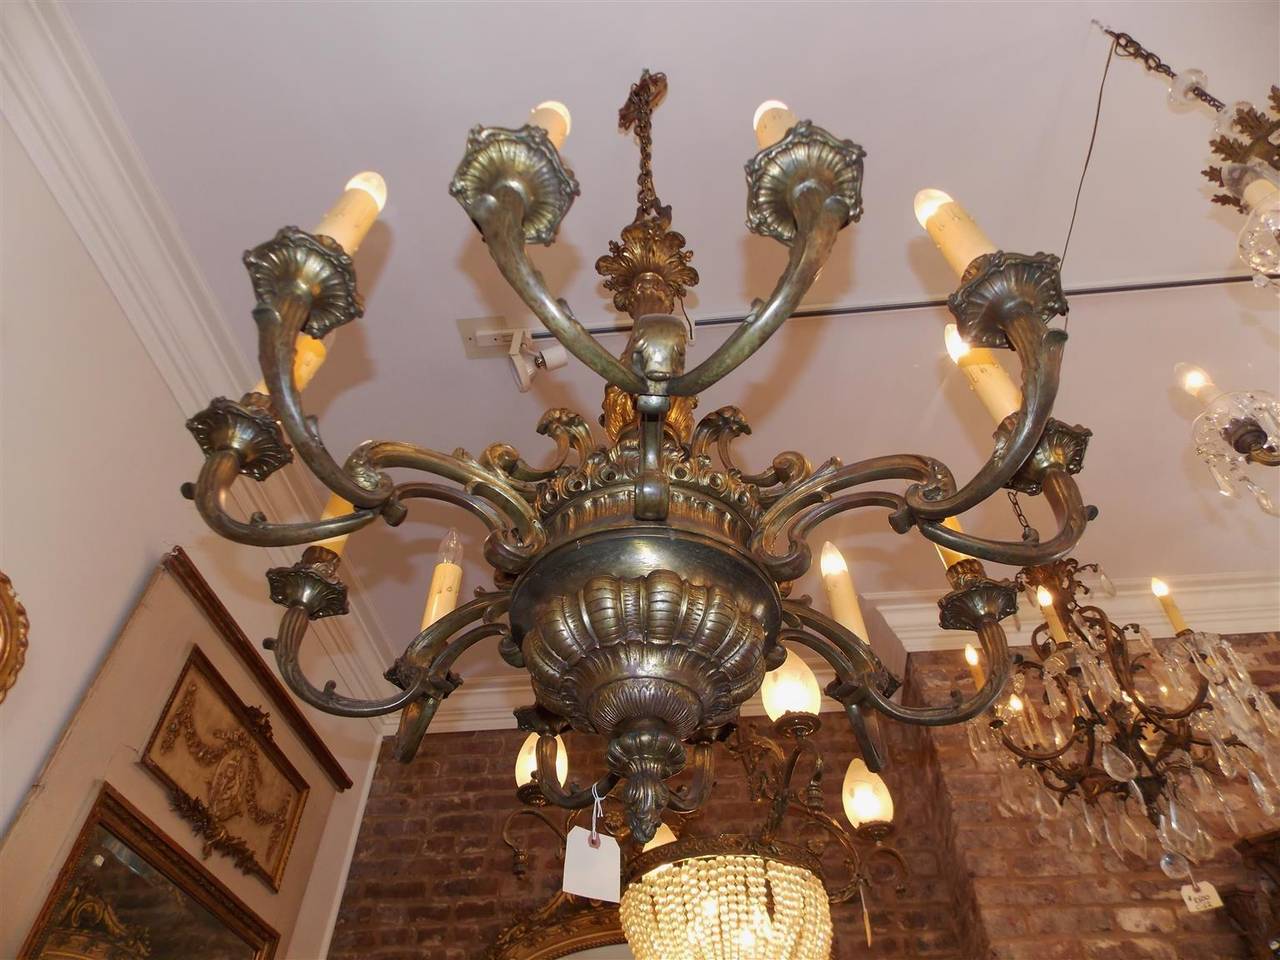 Mid-19th Century French Gilt Bronze Decorative Floral Chandelier, Circa 1840 For Sale